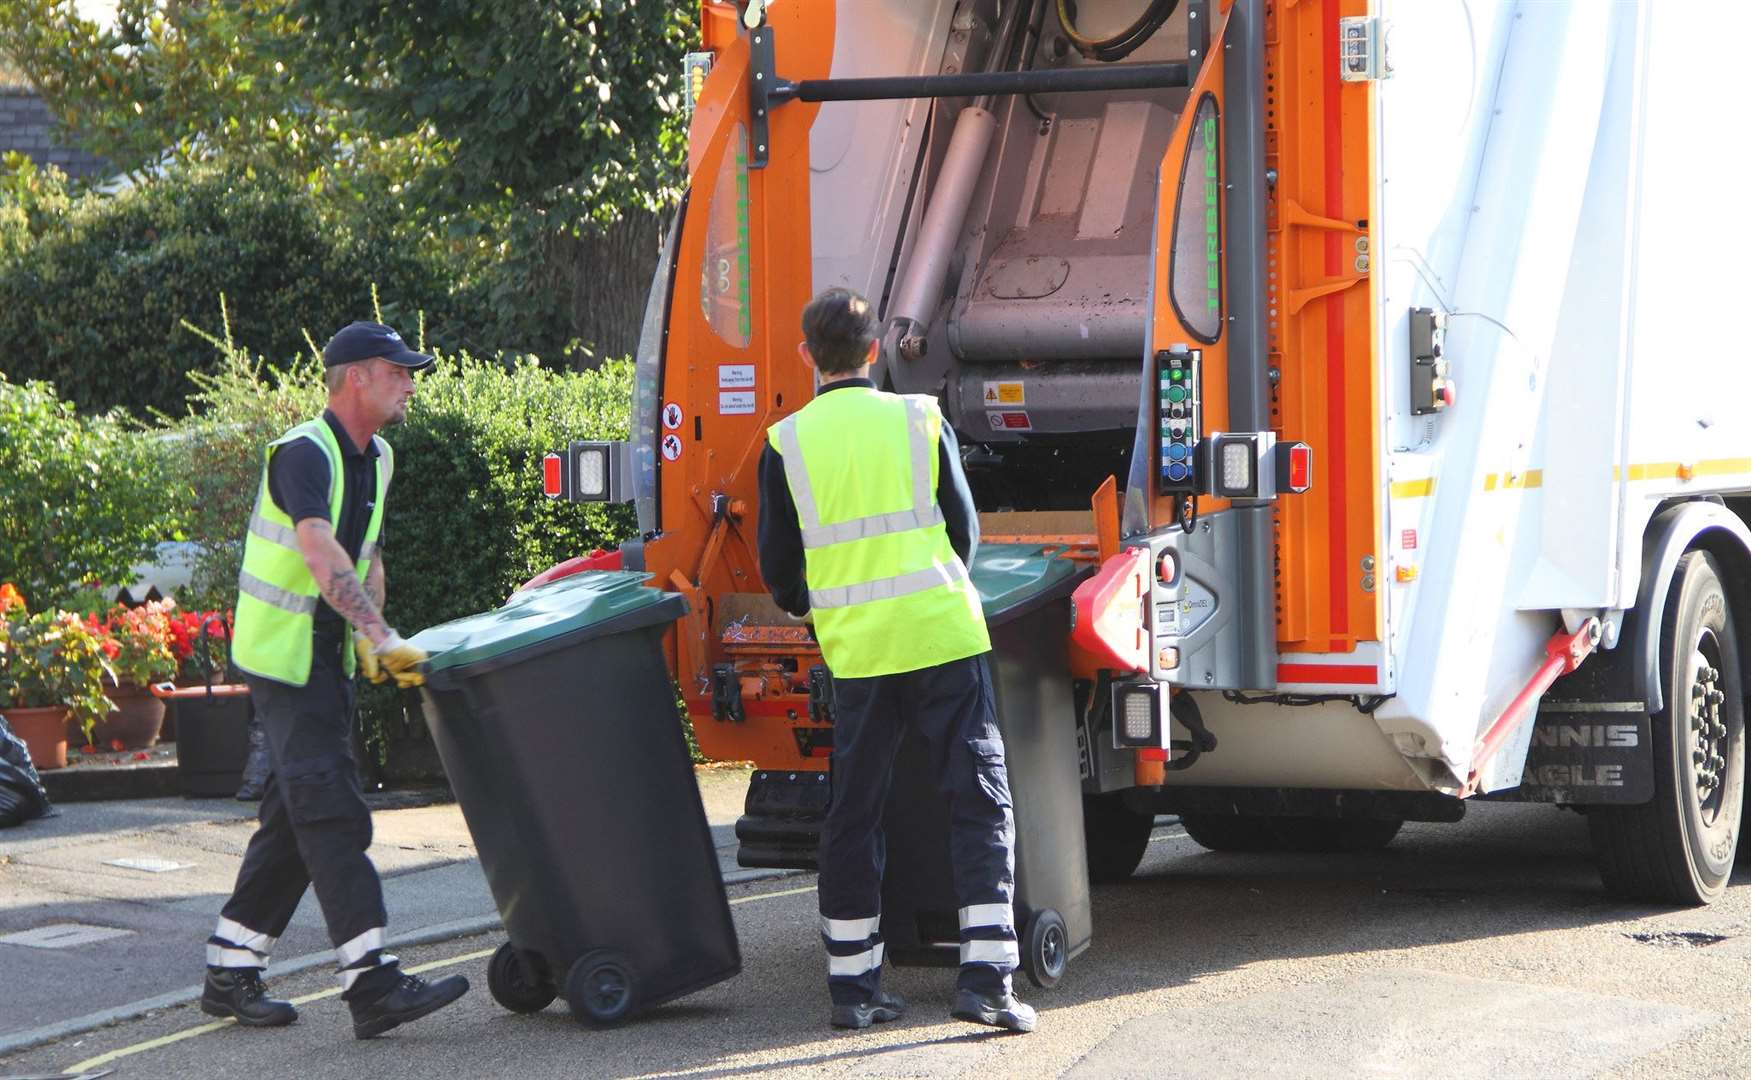 Bins may not be collected on time after Britain leaves the European Union, council chiefs are warning